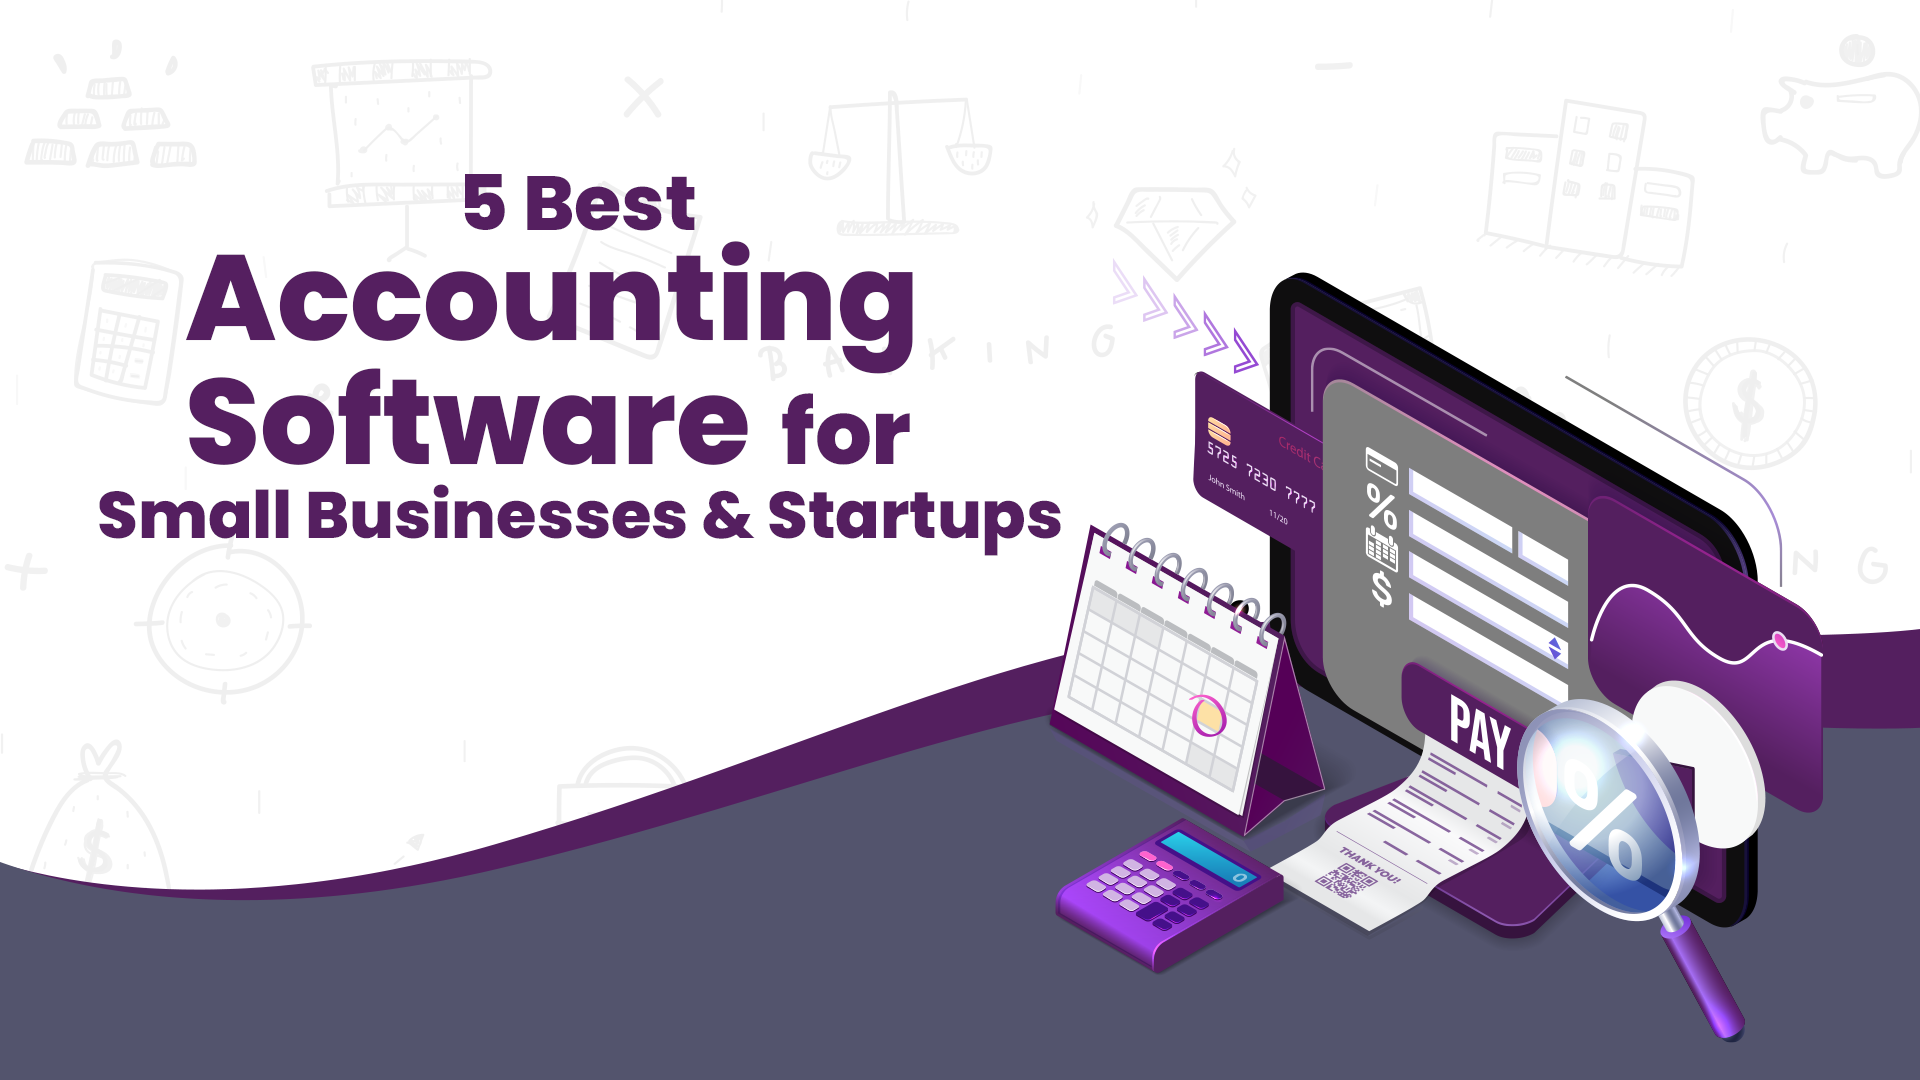 5 Best Accounting Software for Small Business and Startups in 2022